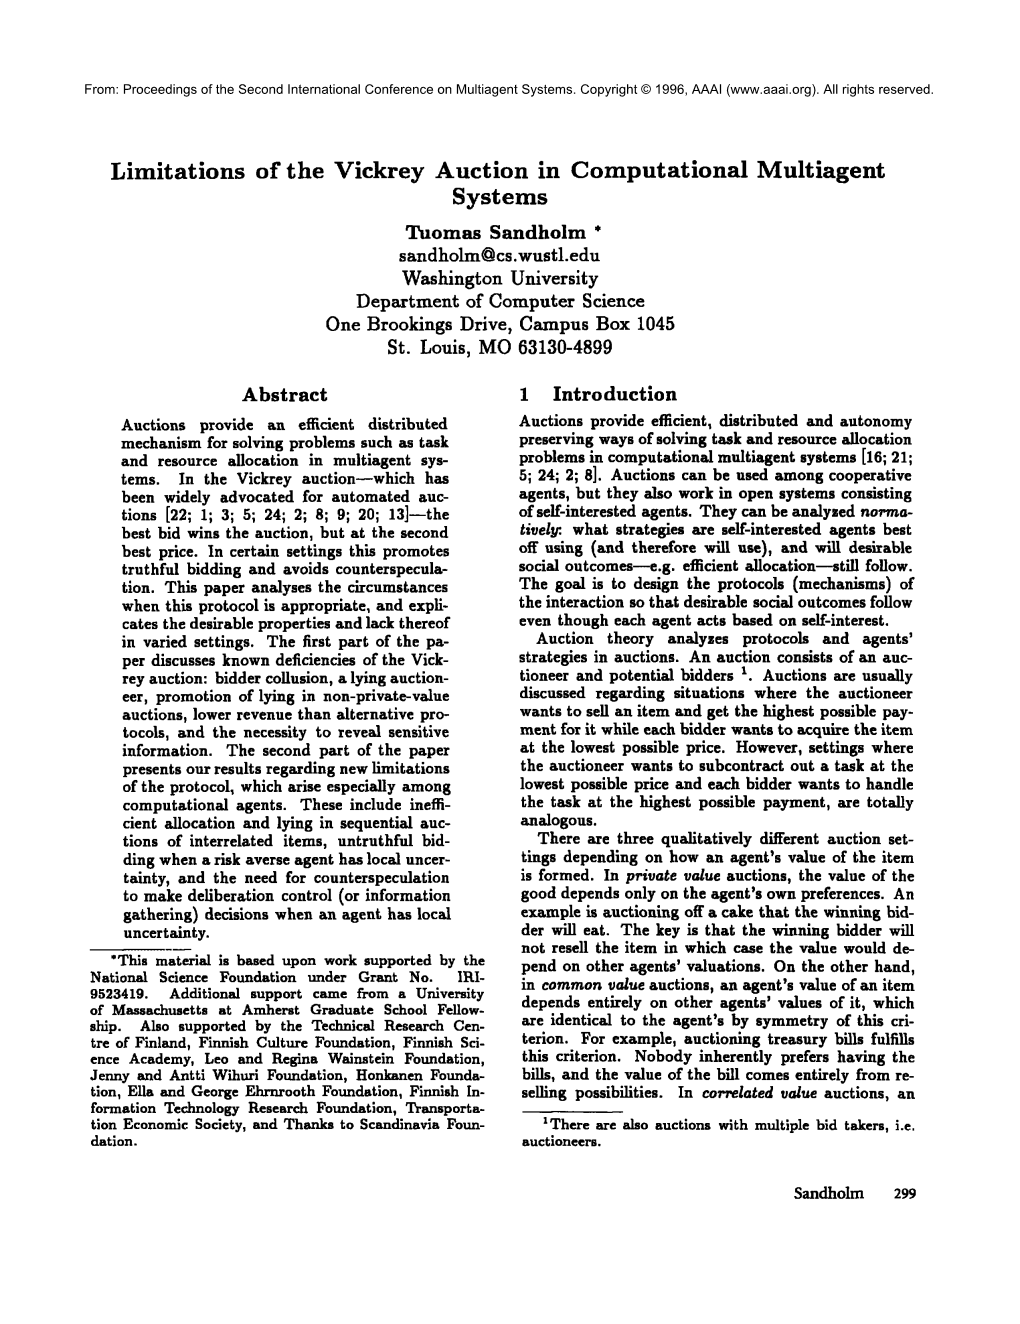 Limitations of the Vickrey Auction in Computational Multiagent Systems